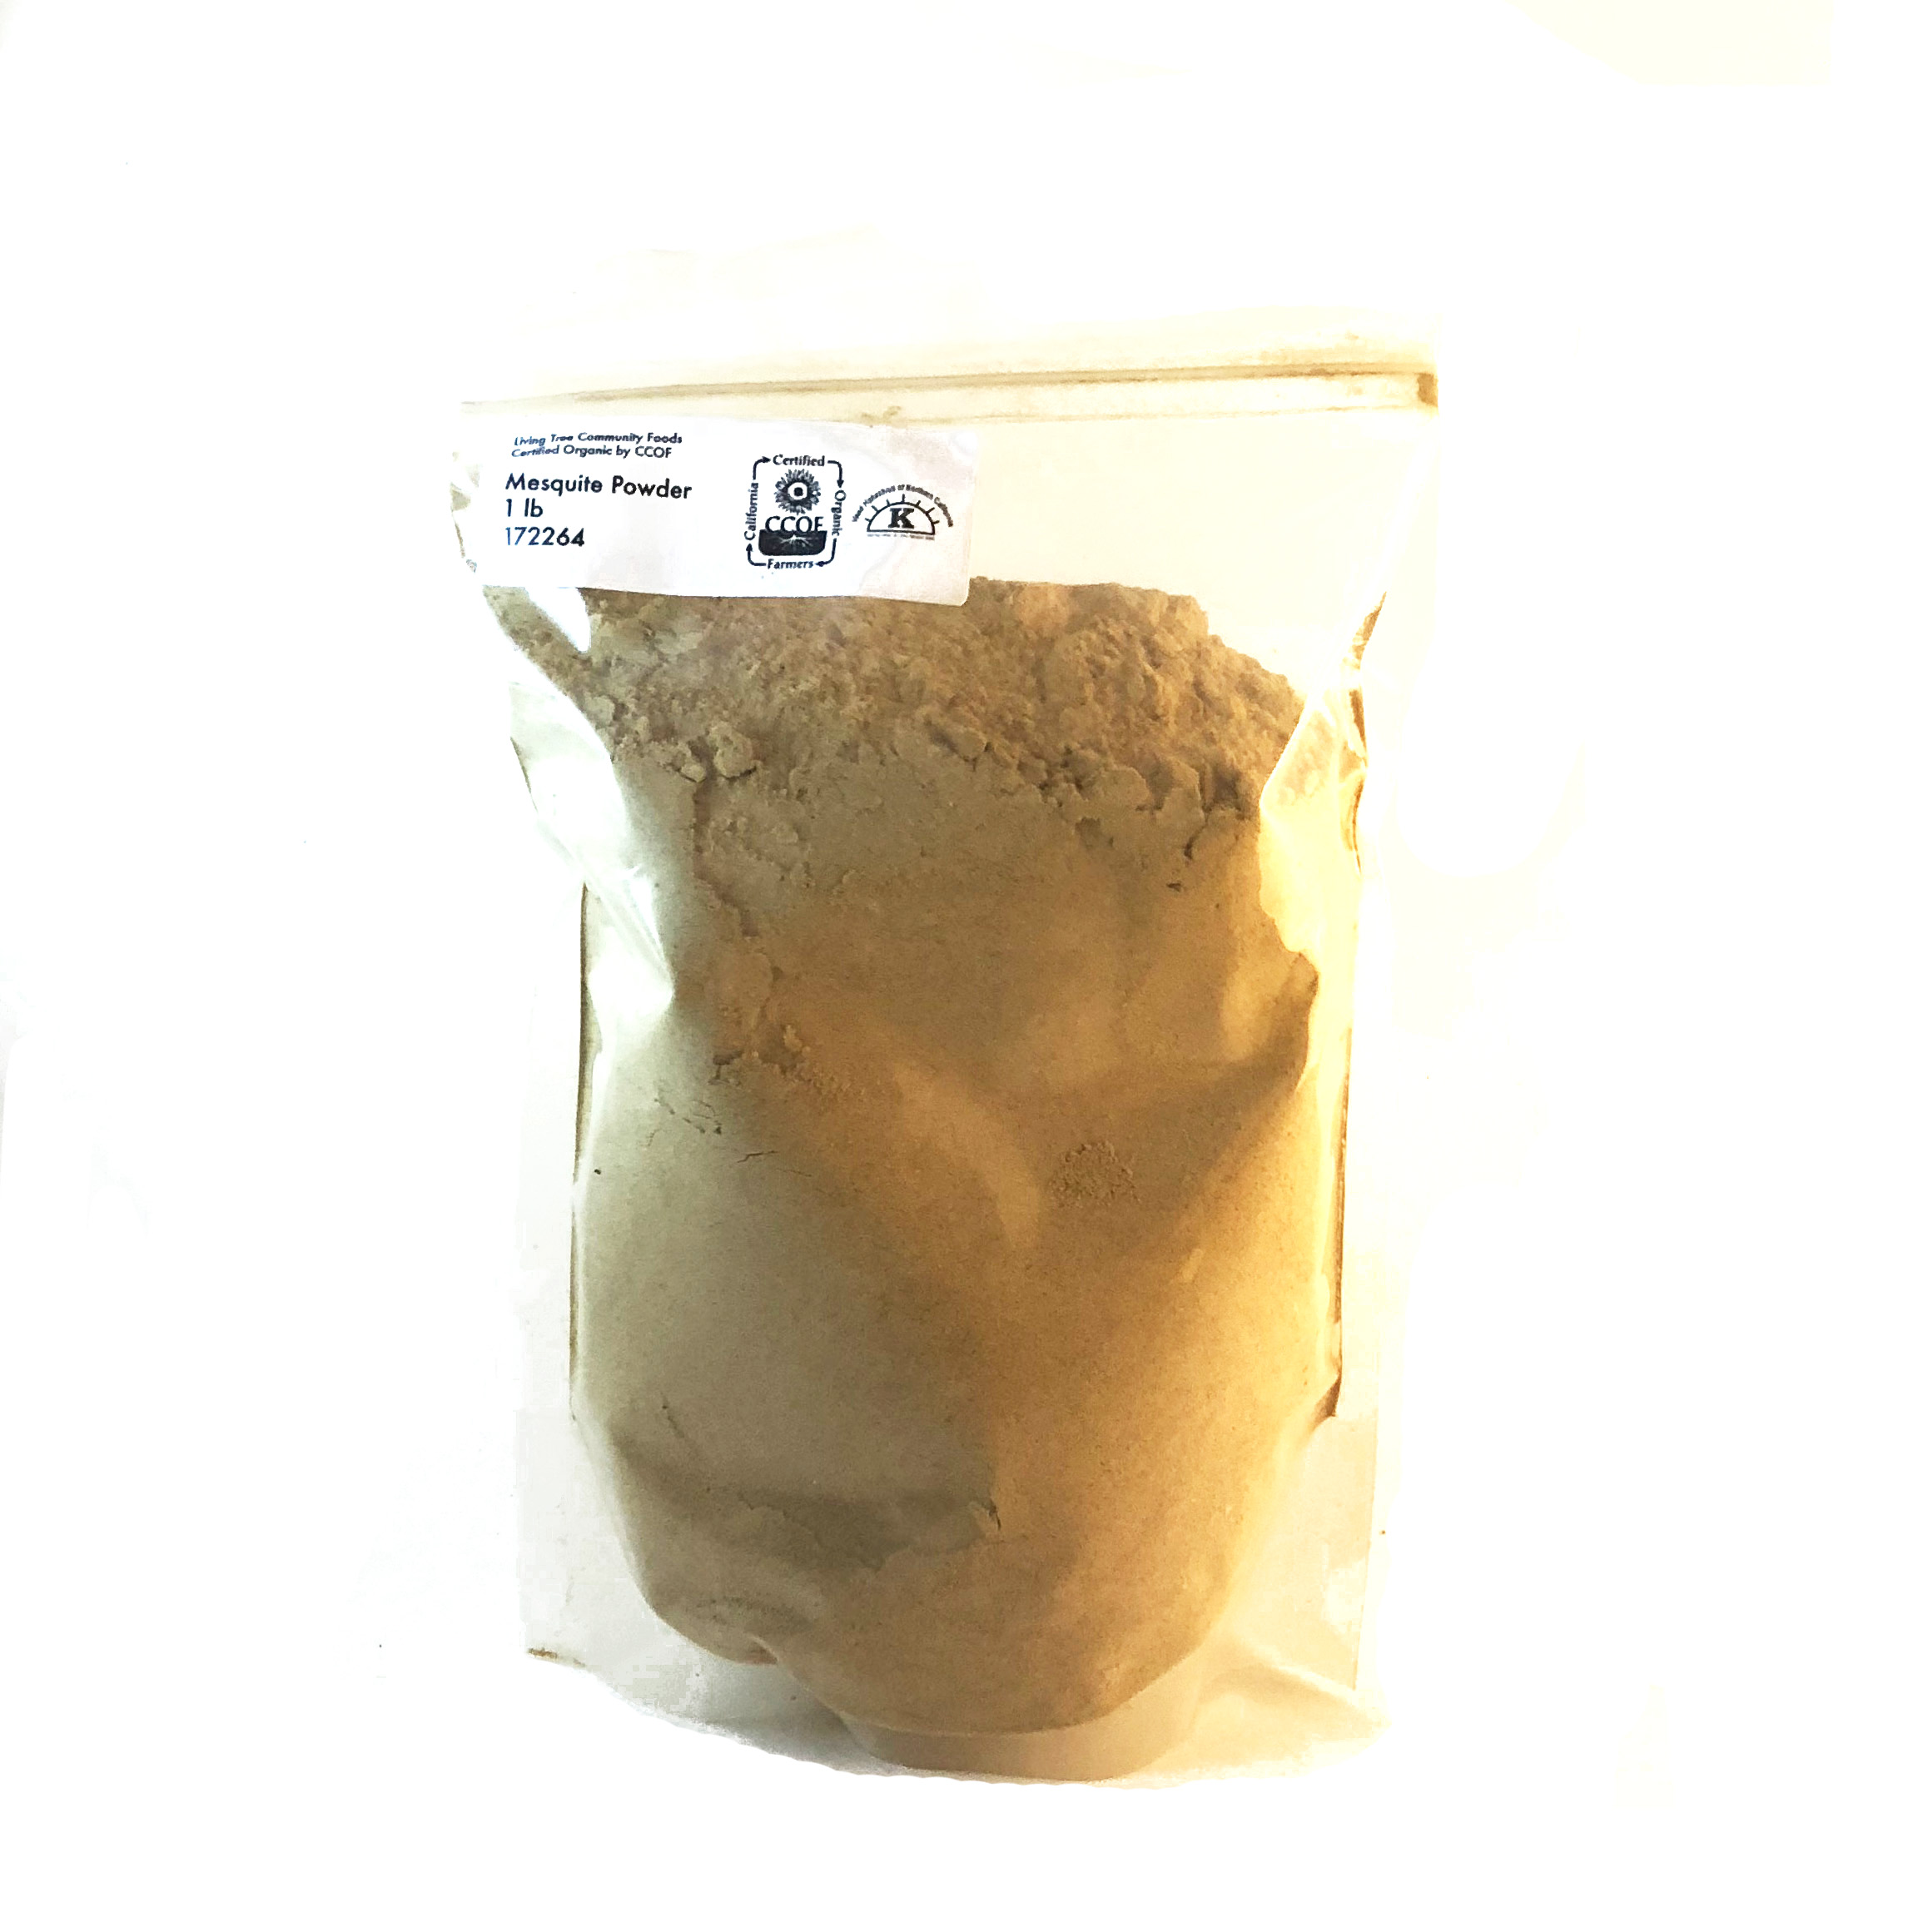 Mesquite Powder Package